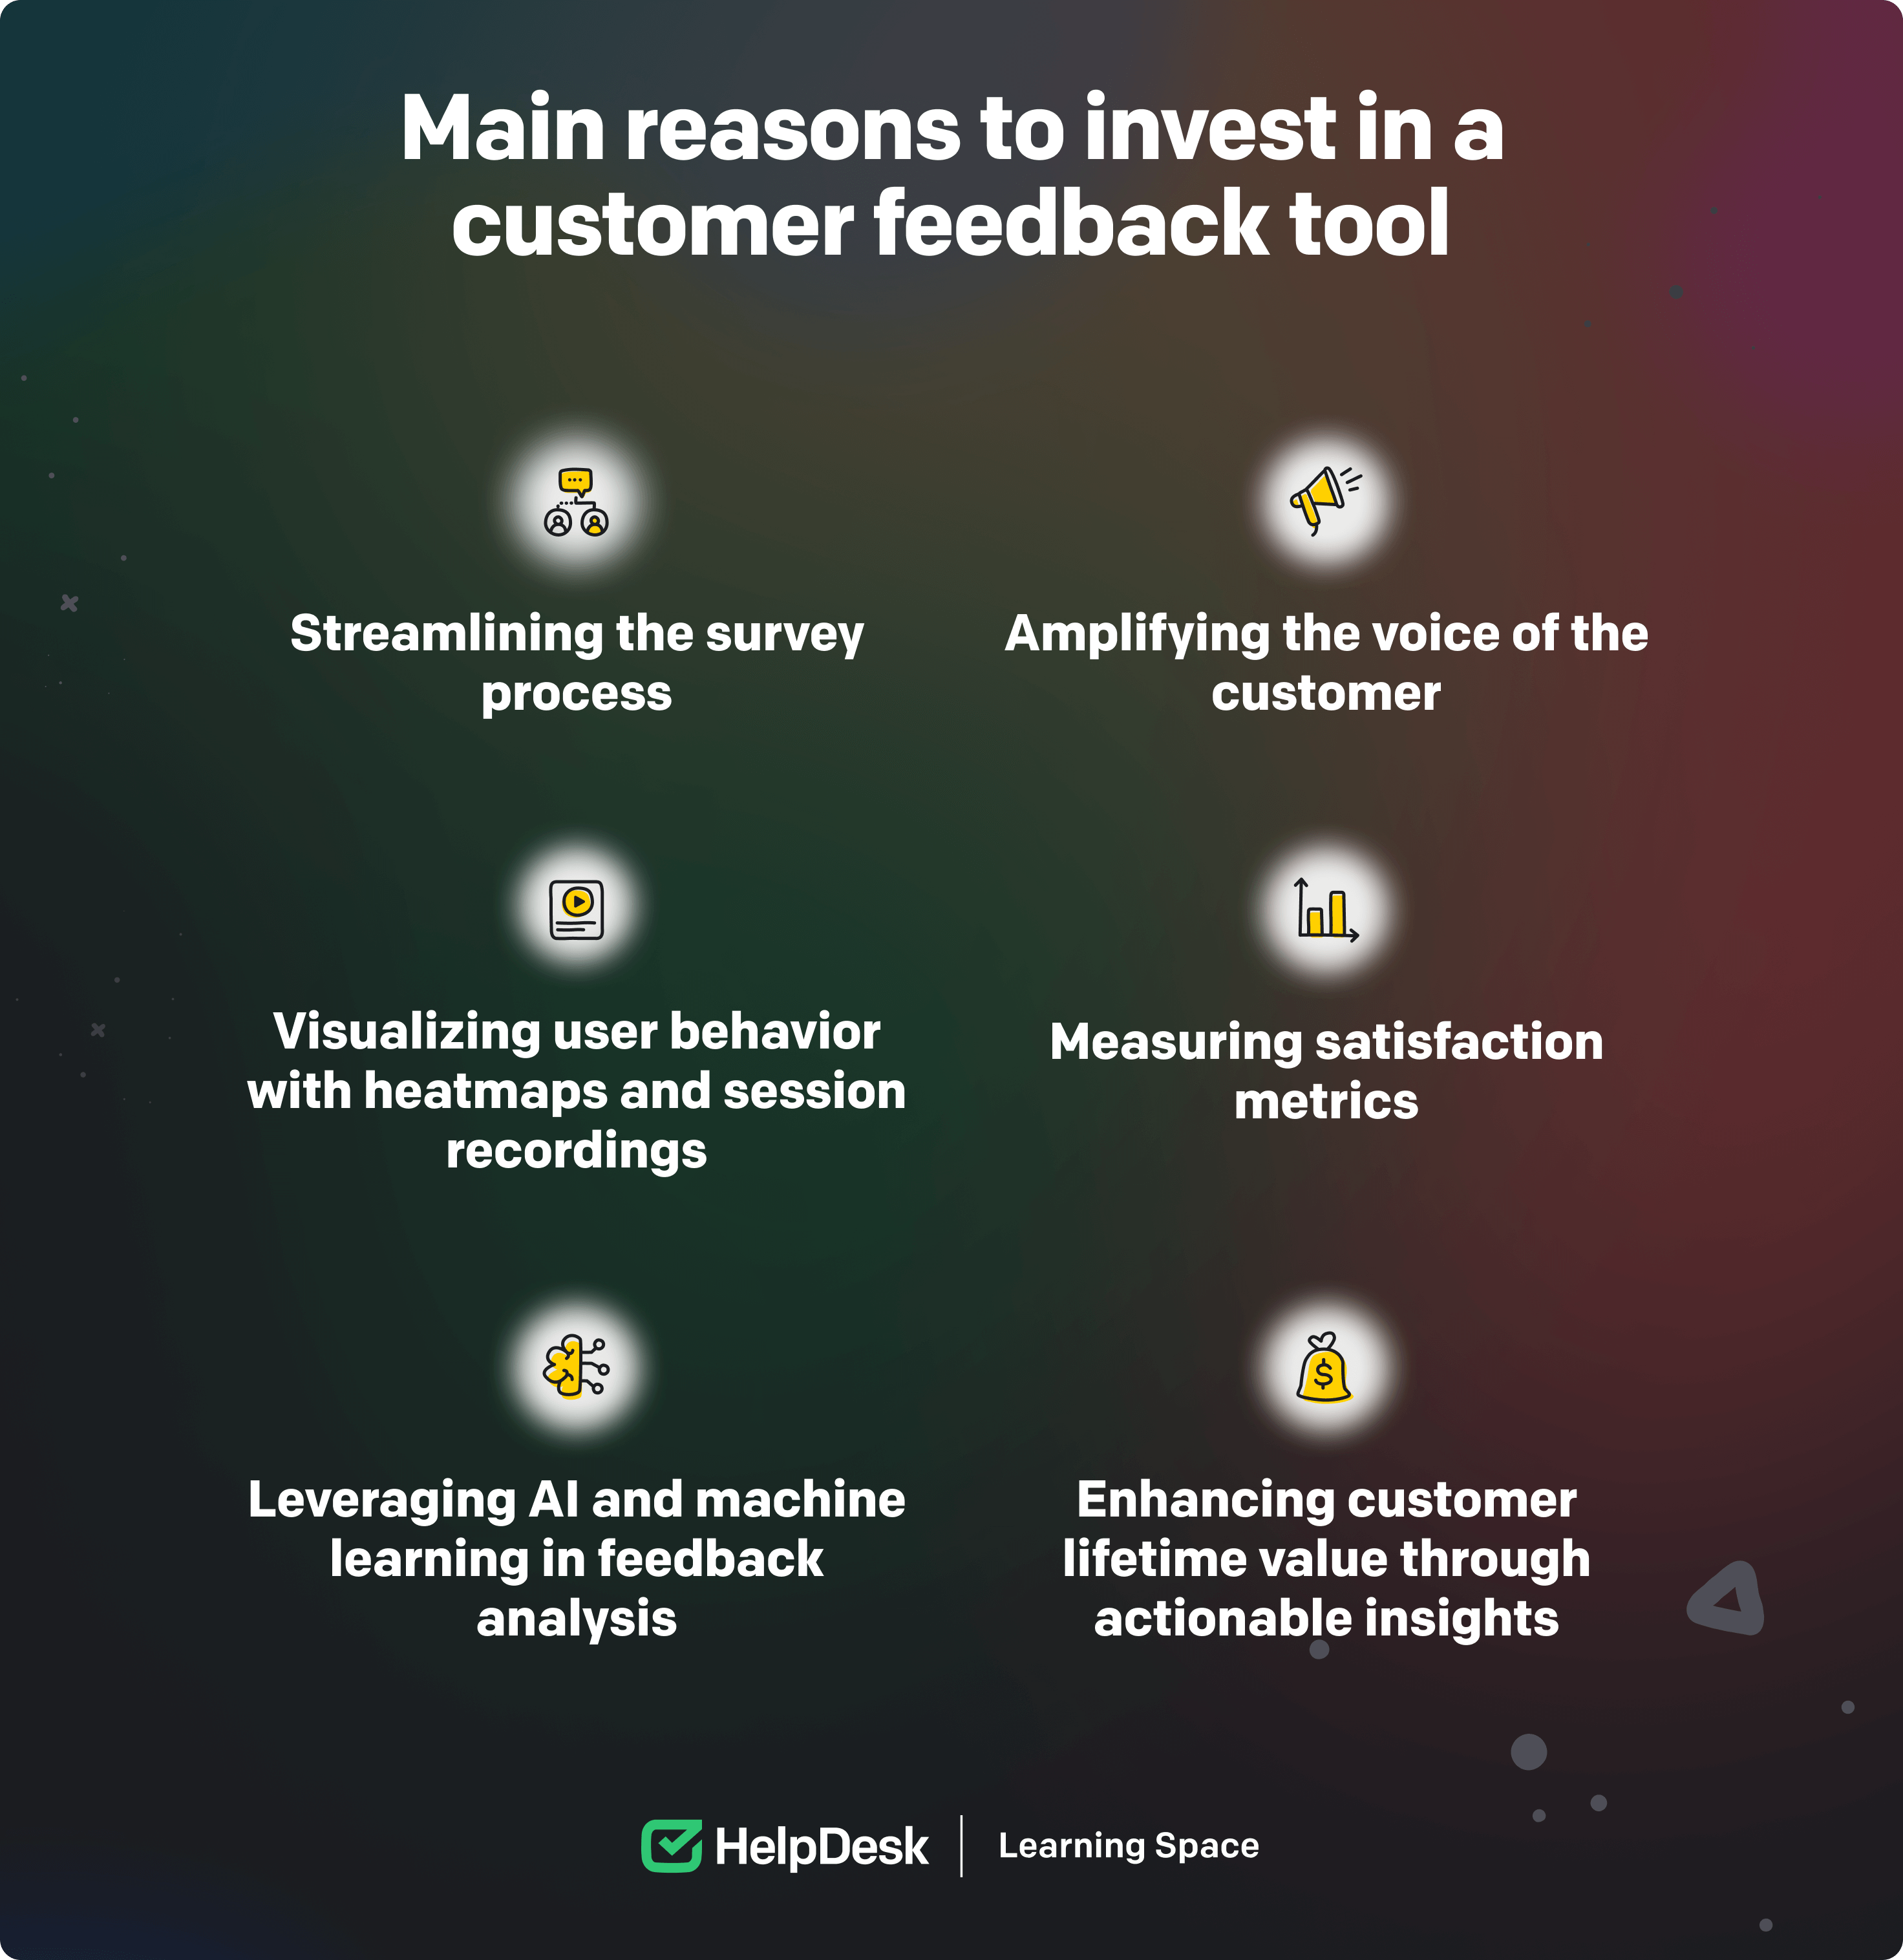 Main reasons to invest in a customer feedback tool